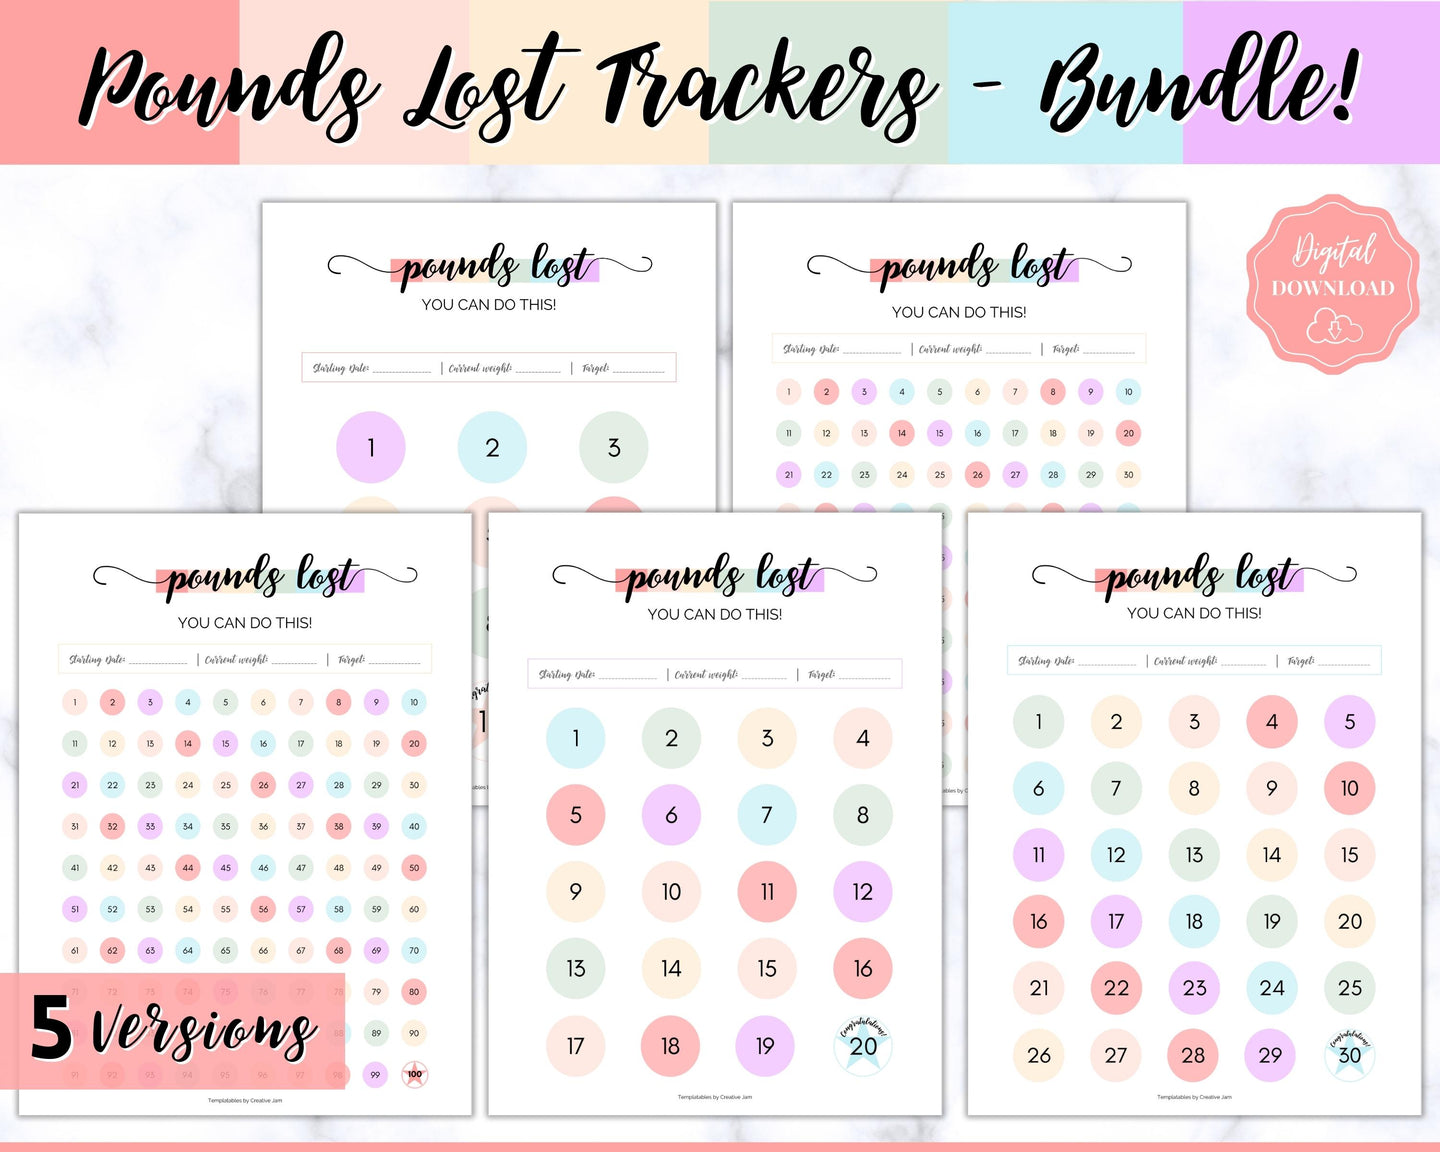 Pounds Lost Tracker Bundle - 10 20, 30, 50, 100 lbs Printable Weight Loss Printables | Swash Rainbow